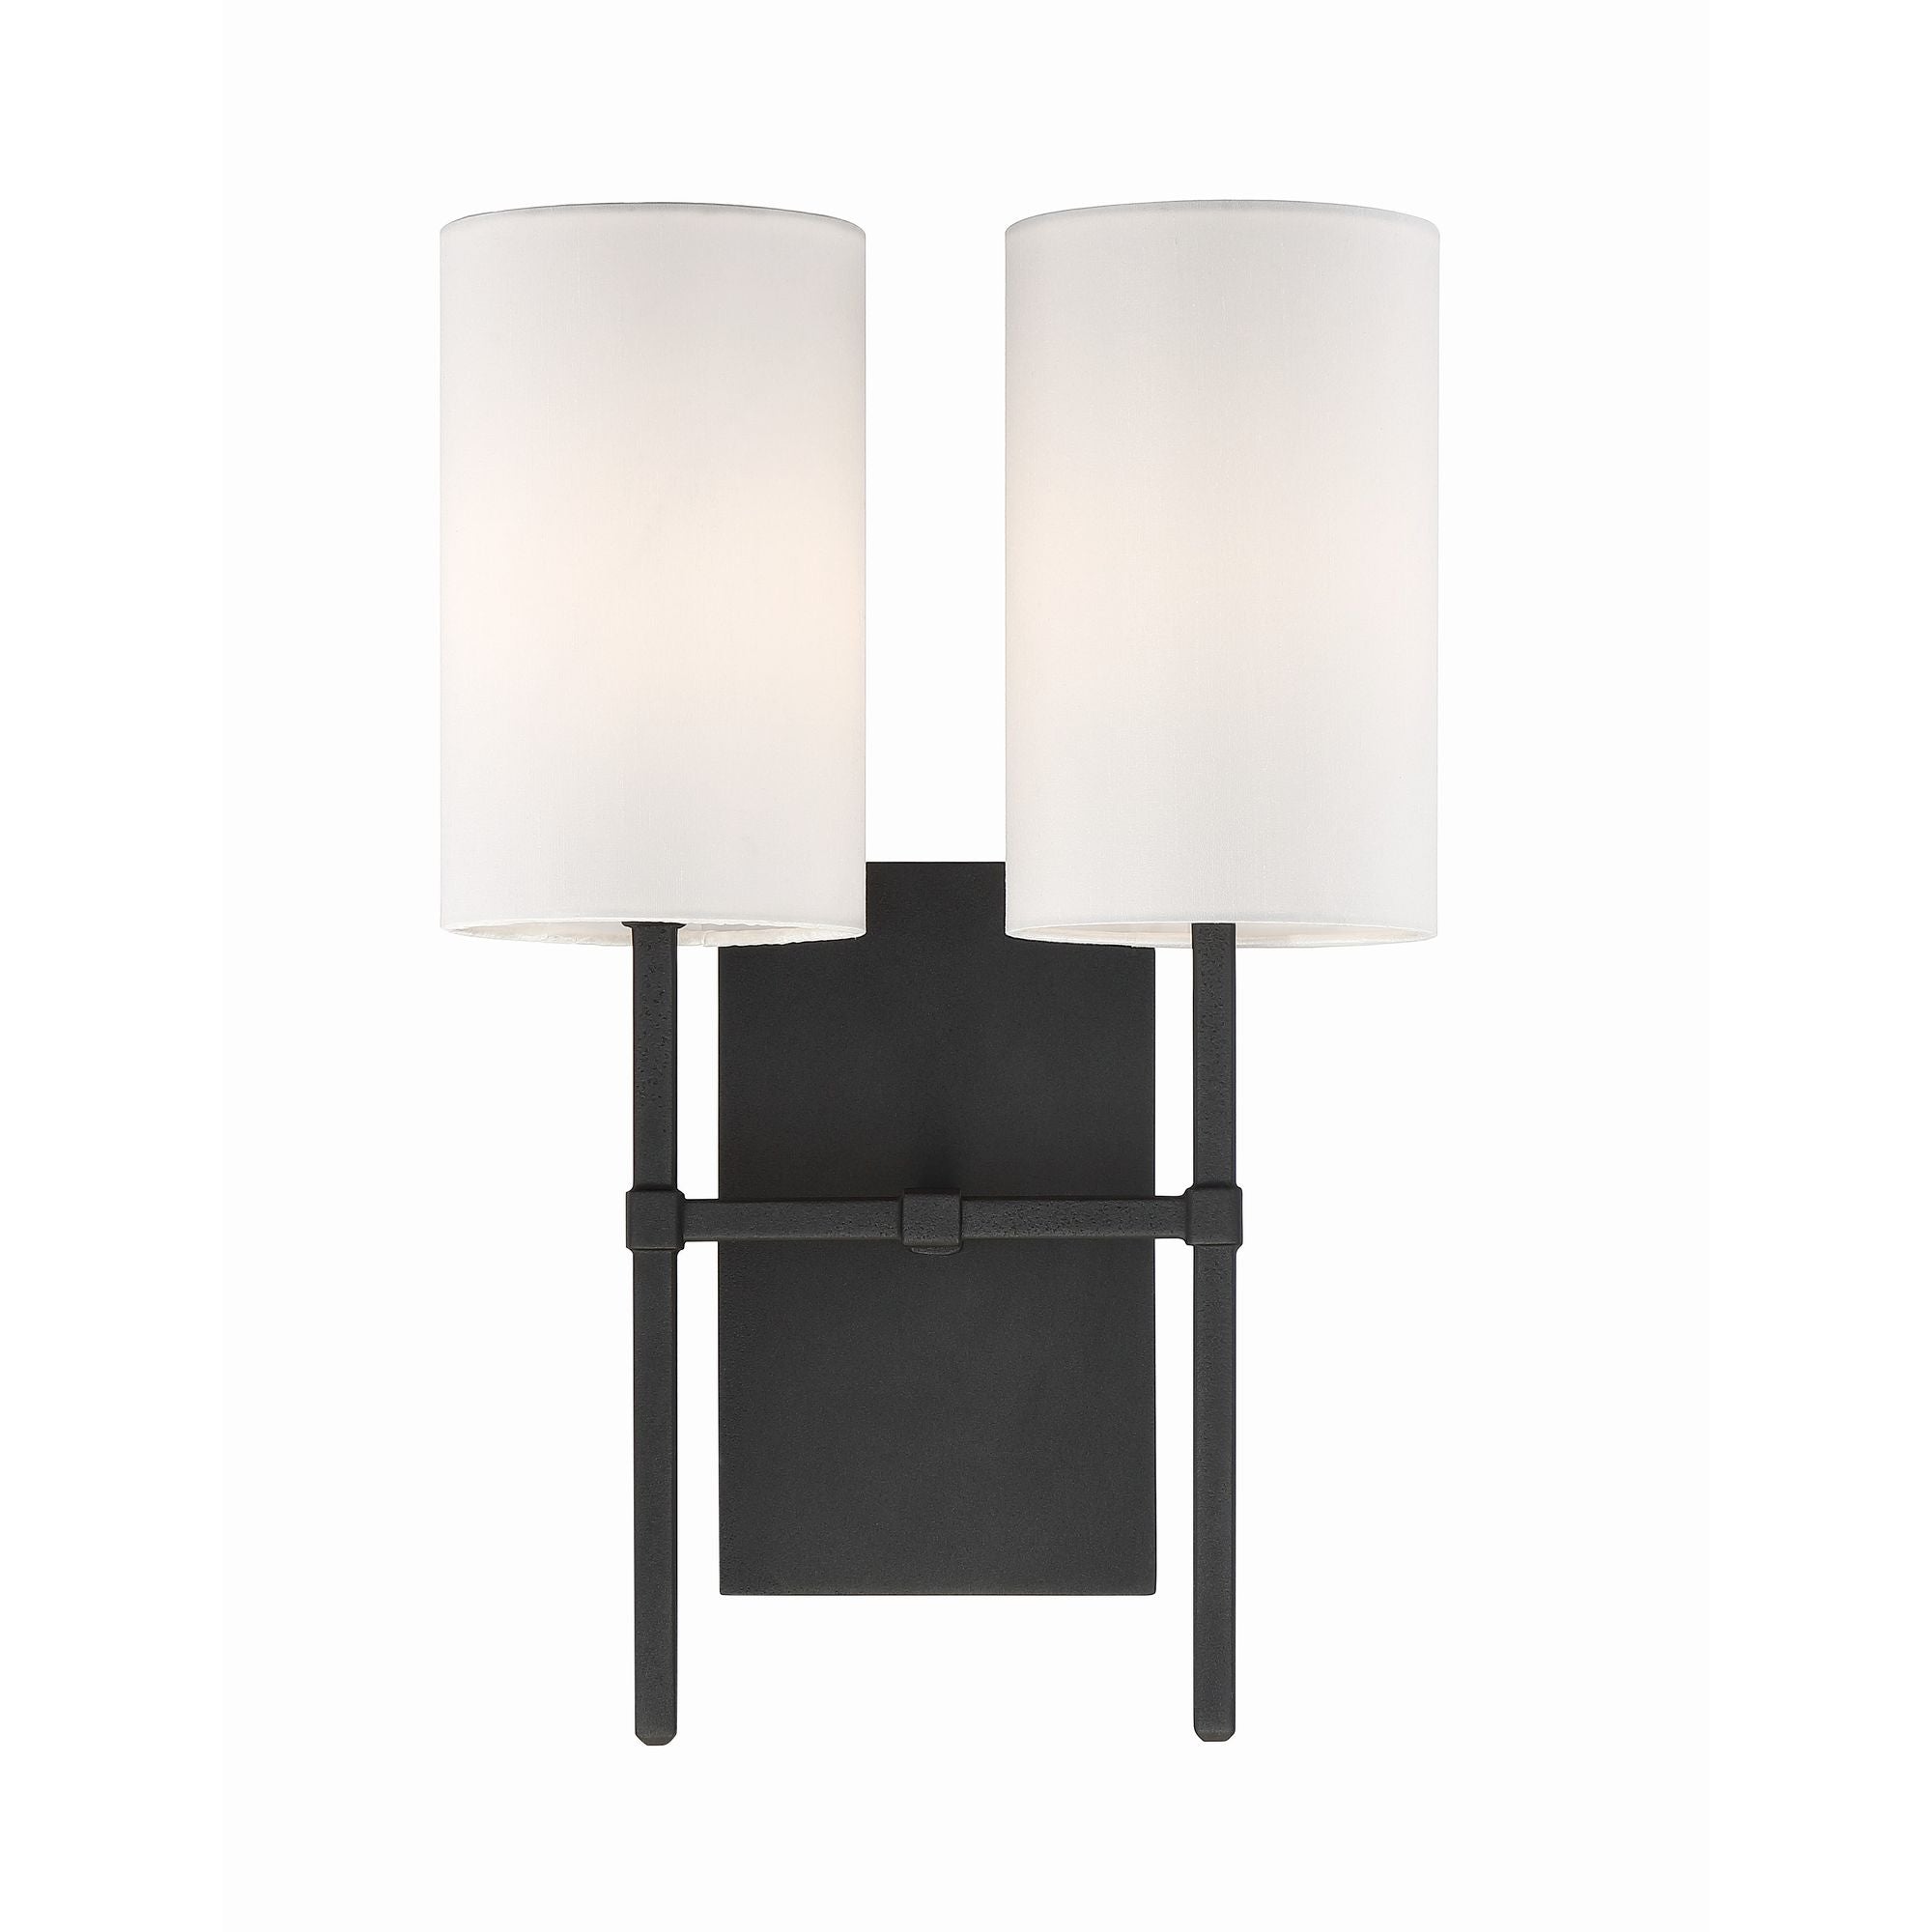 Veronica 2 Light Black Forged Wall Mount